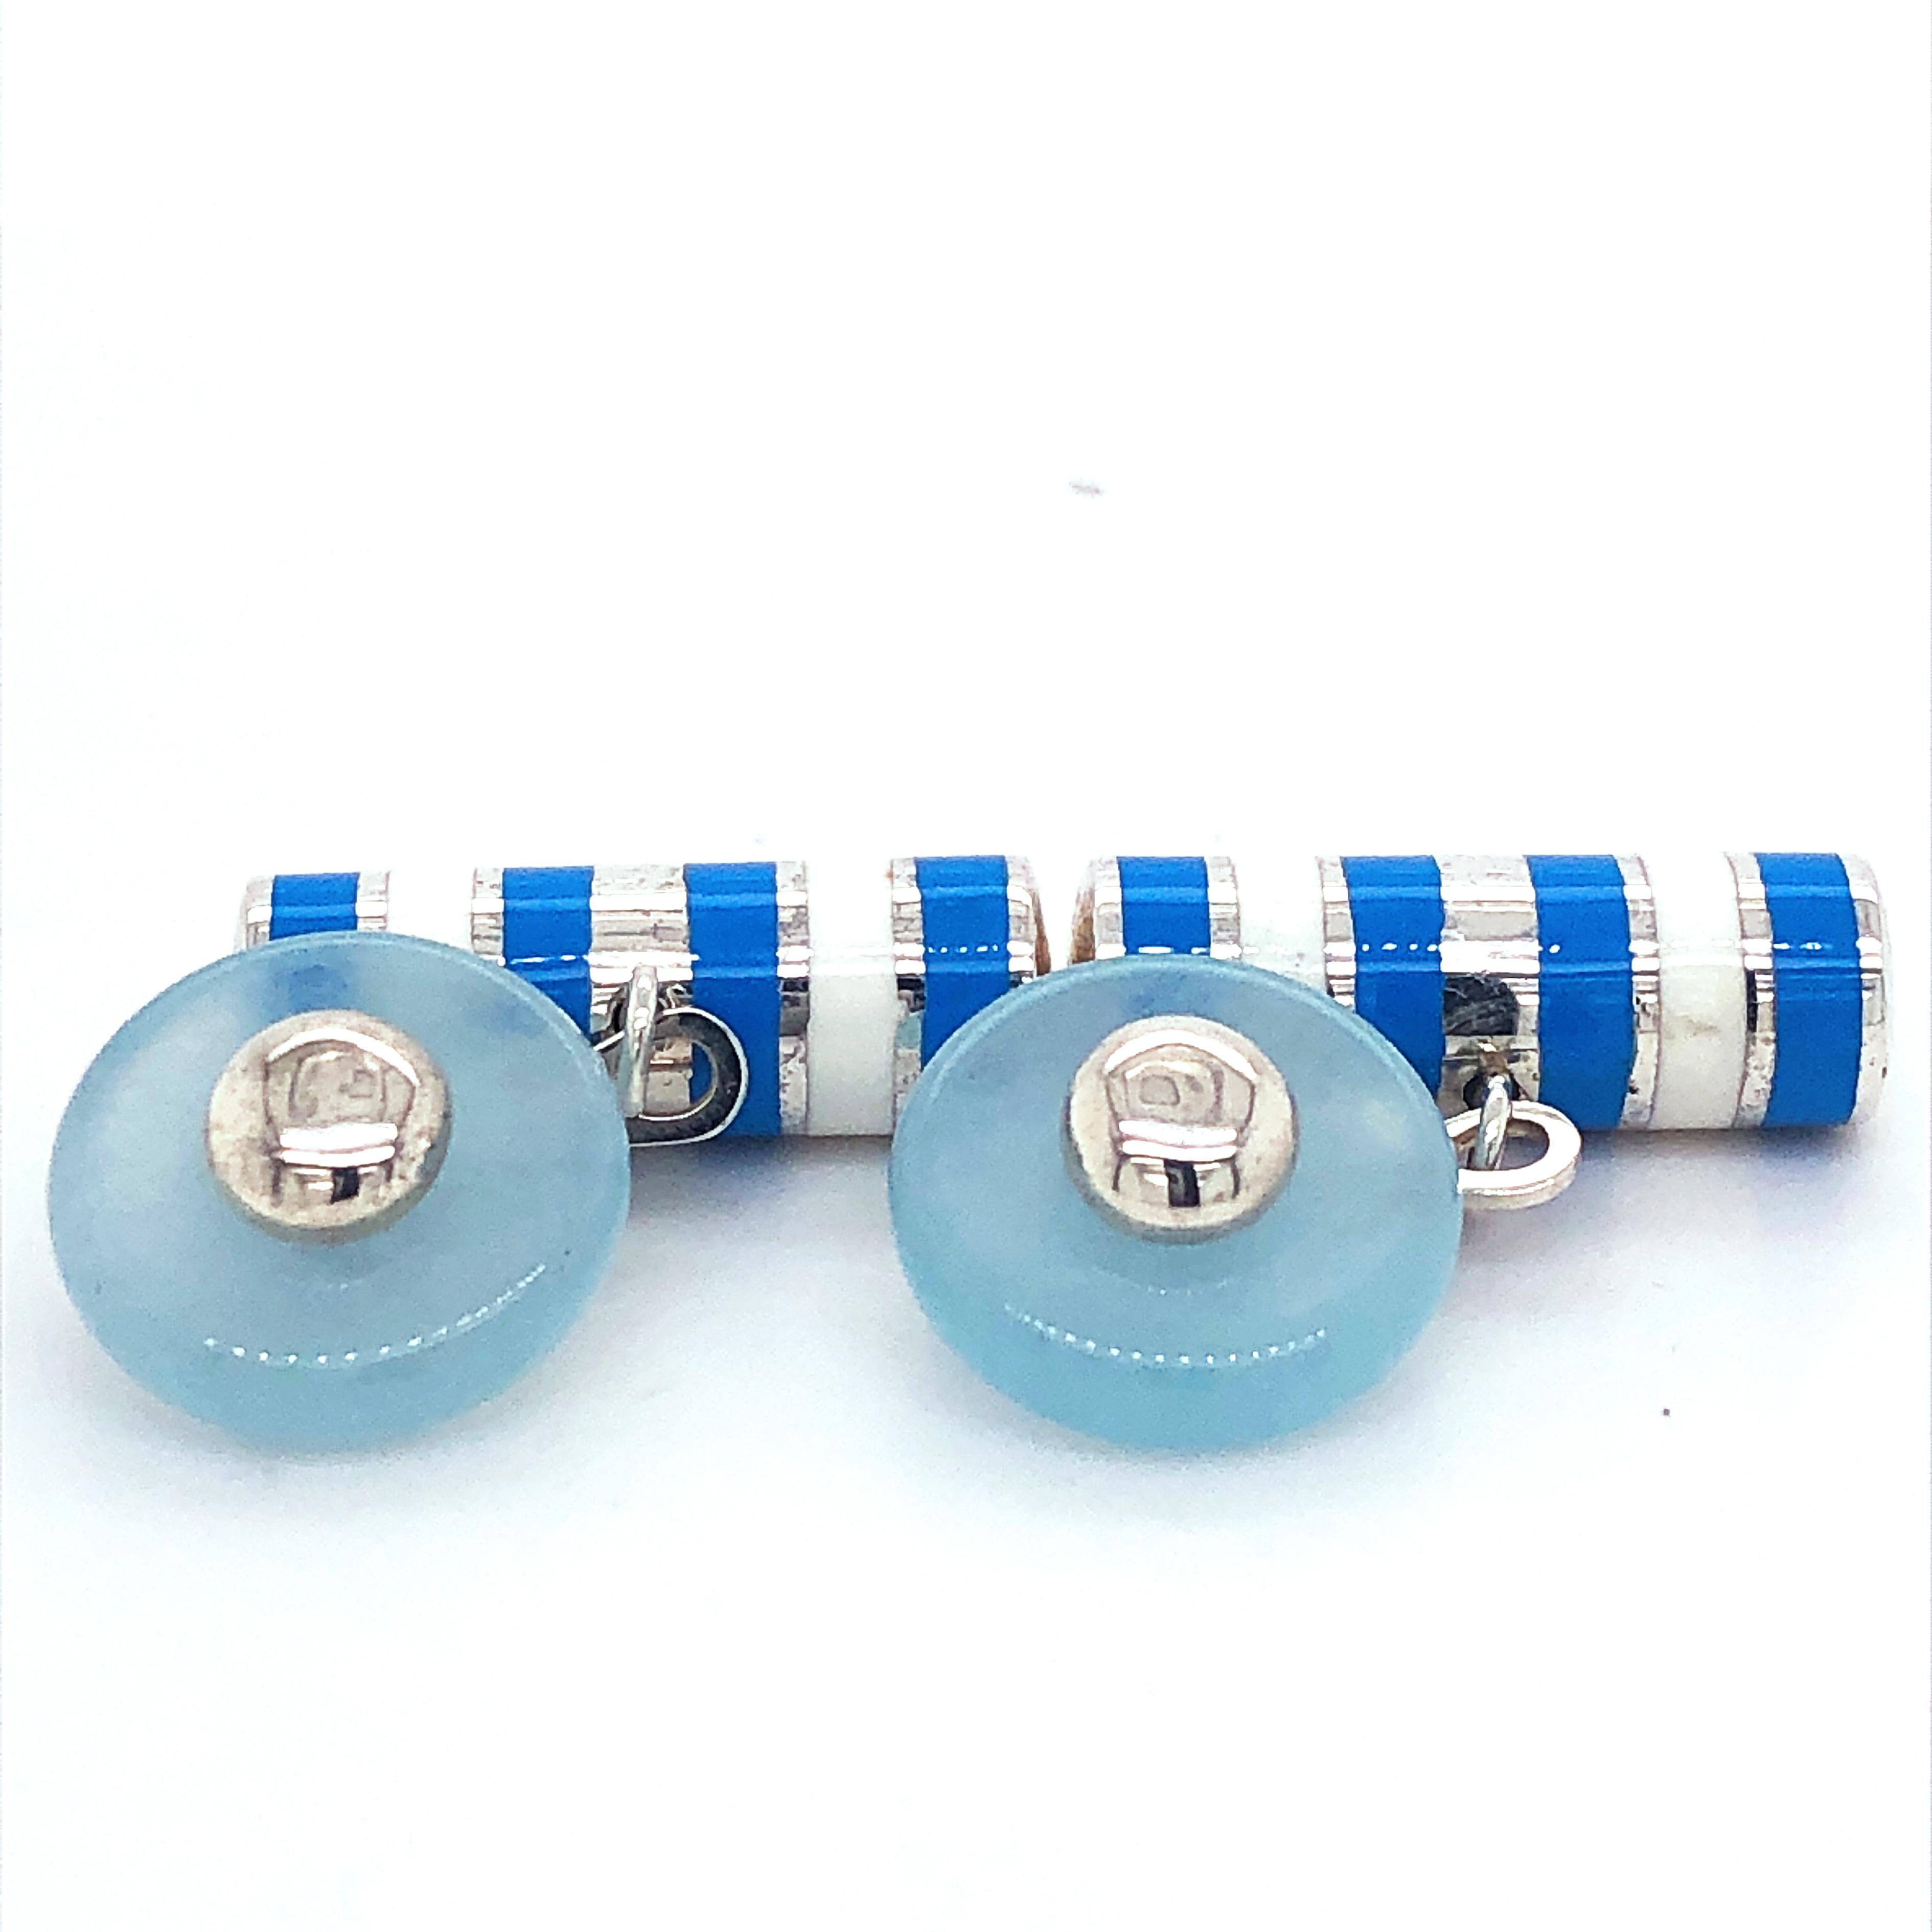 Berca Aquamarine White and Cerulean Blue Hand Enameled Sterling Silver Cufflinks In New Condition For Sale In Valenza, IT